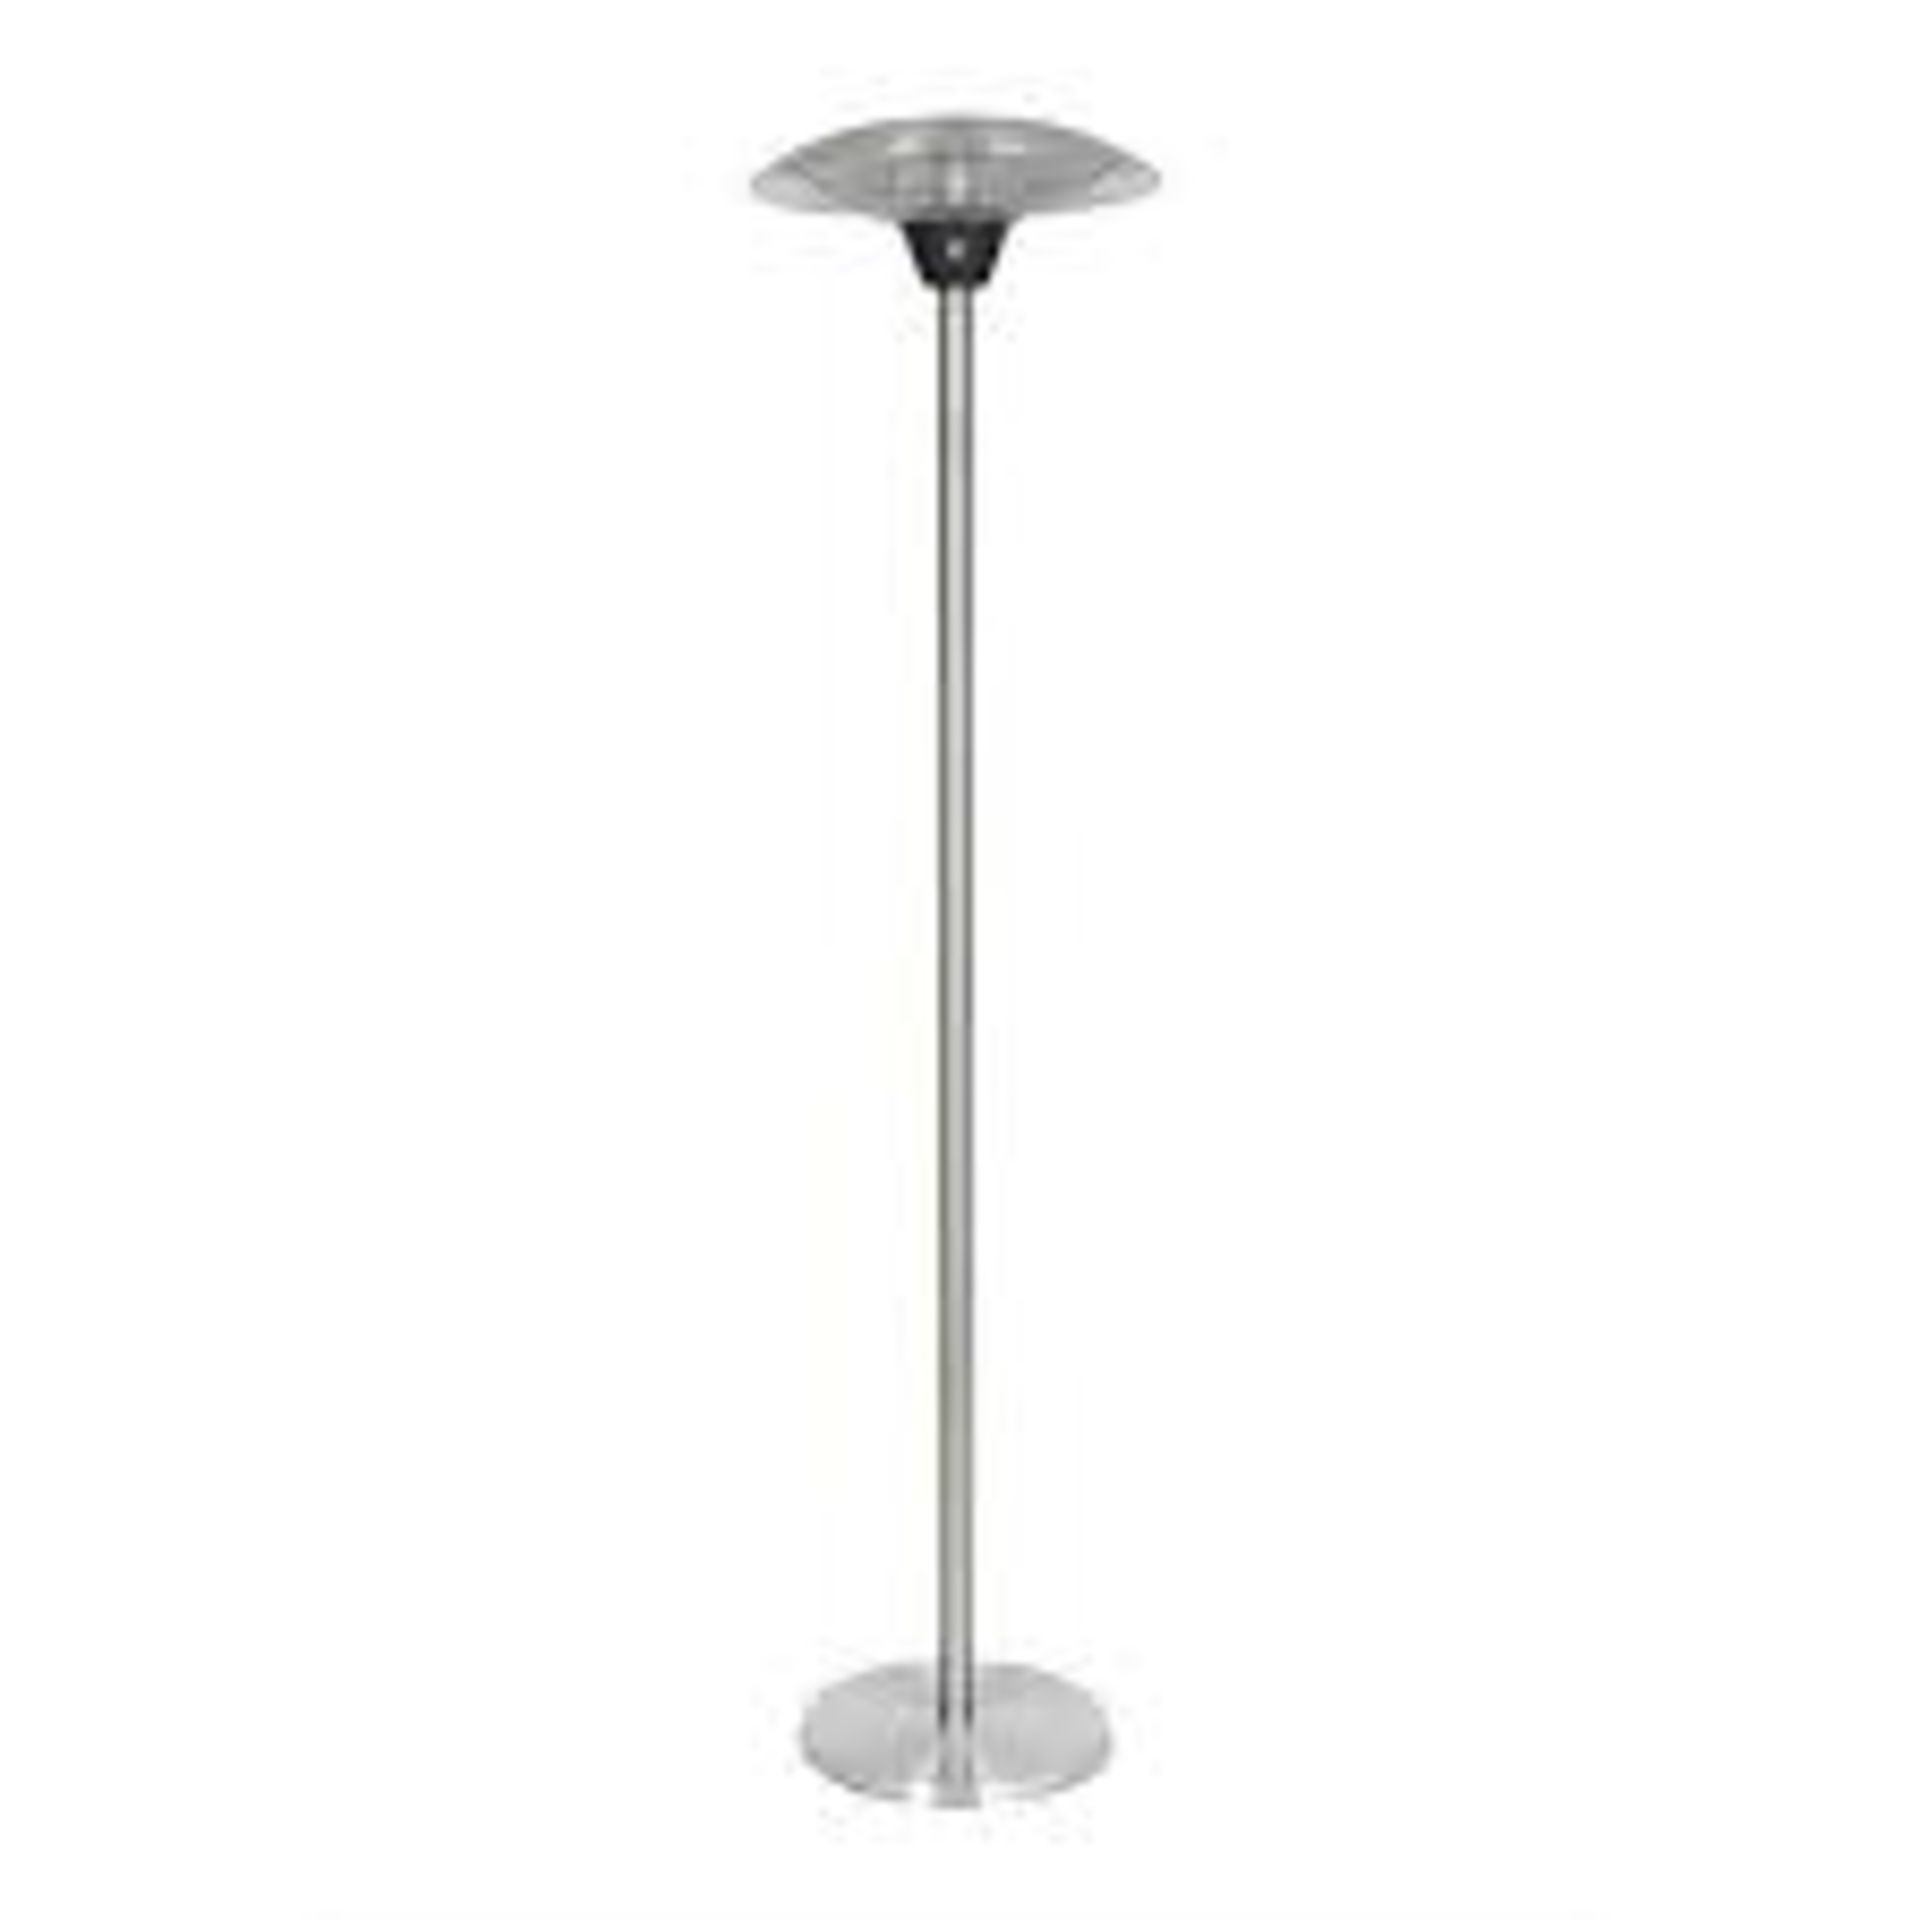 RRP £224.99 - LA HACIENDA ELECTRIC AJUSTABLE STANDING HEATER IN SILVER - BOX WEIGHT 16KG